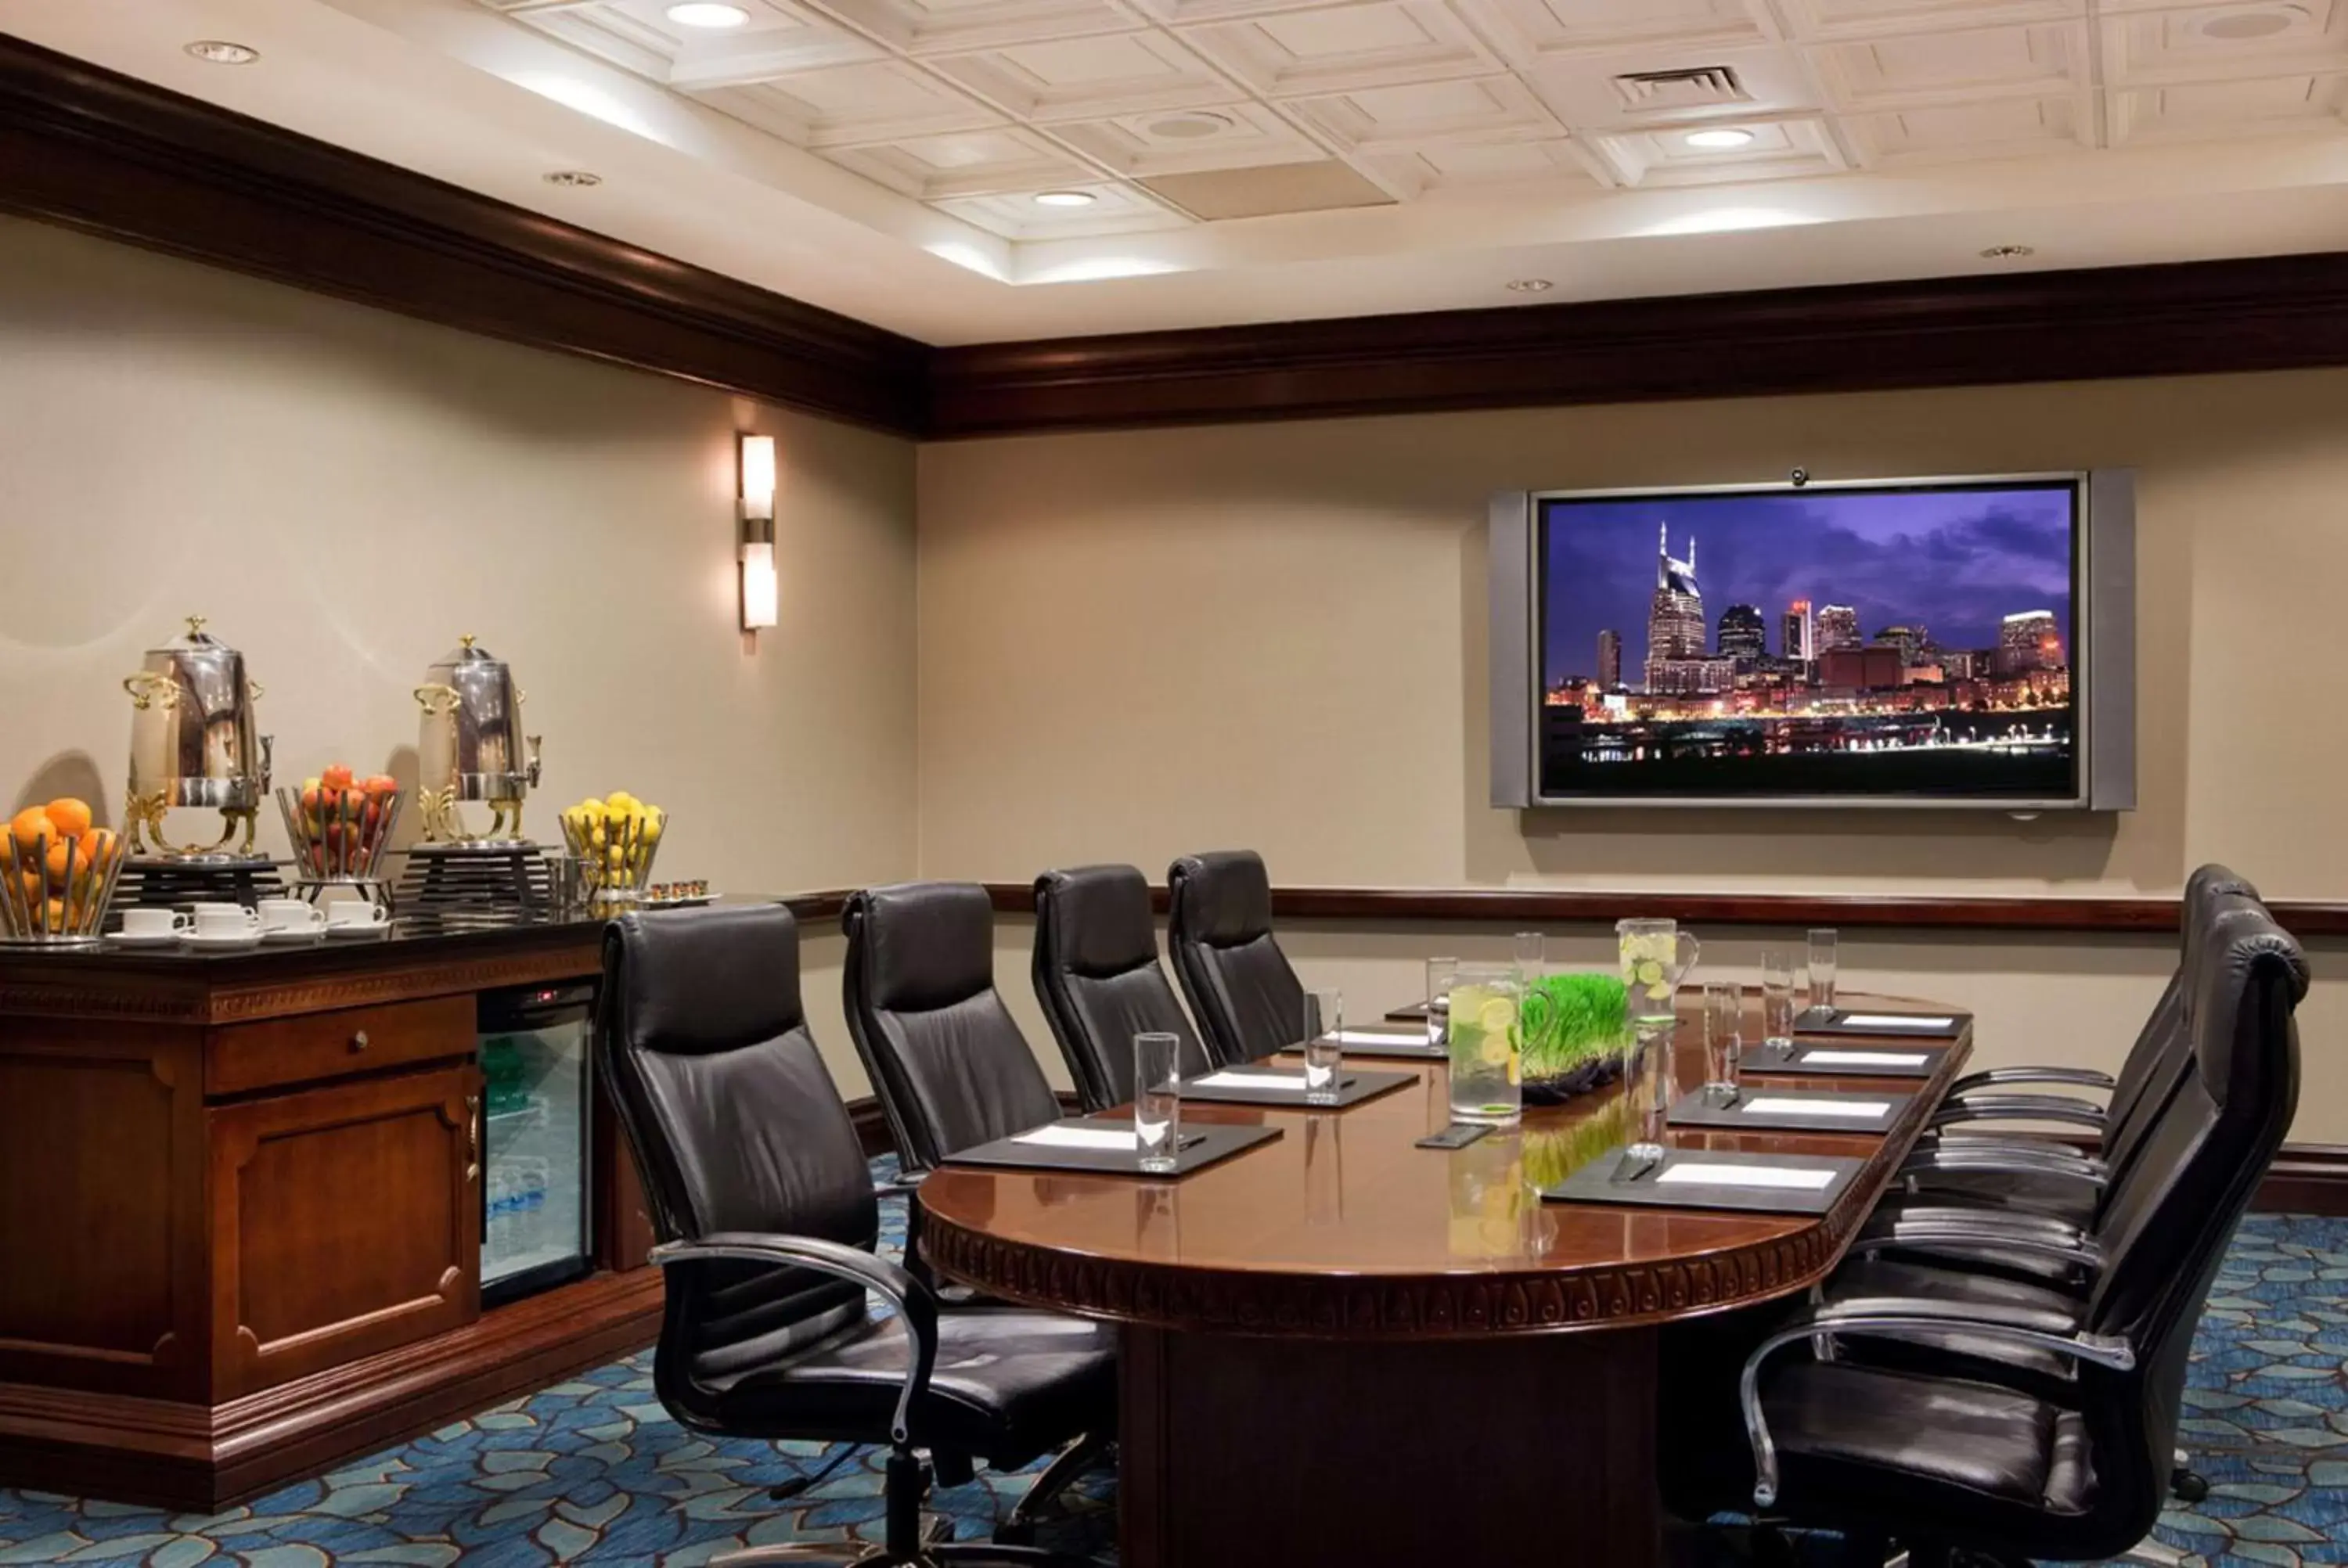 Meeting/conference room in Hilton Nashville Downtown